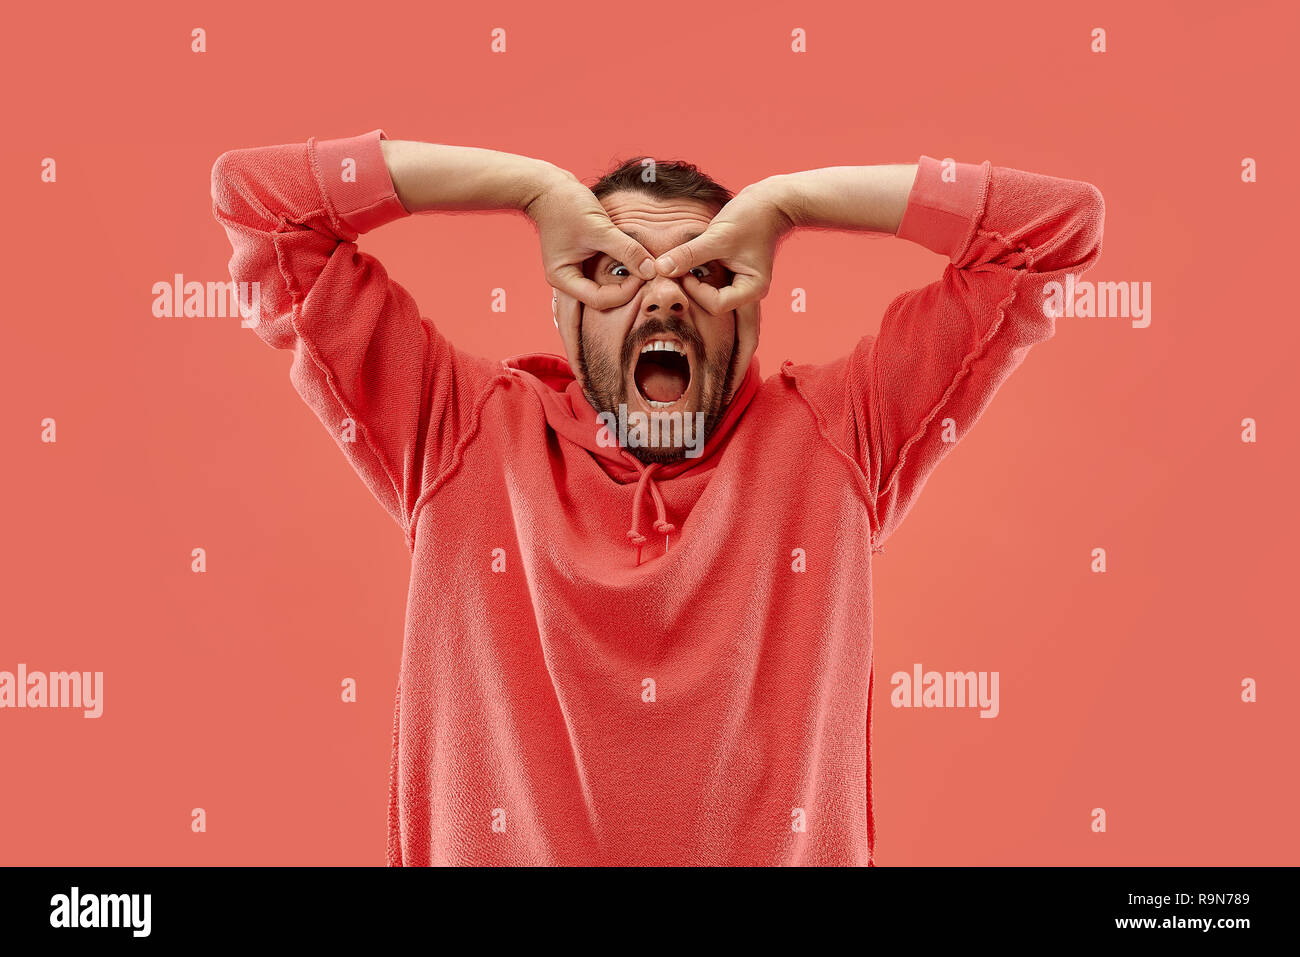 I lost my mind. The squint eyed man with weird expression. Beautiful male half-length portrait isolated on coral studio backgroud. The crazy man. The human emotions, facial expression concept. Stock Photo